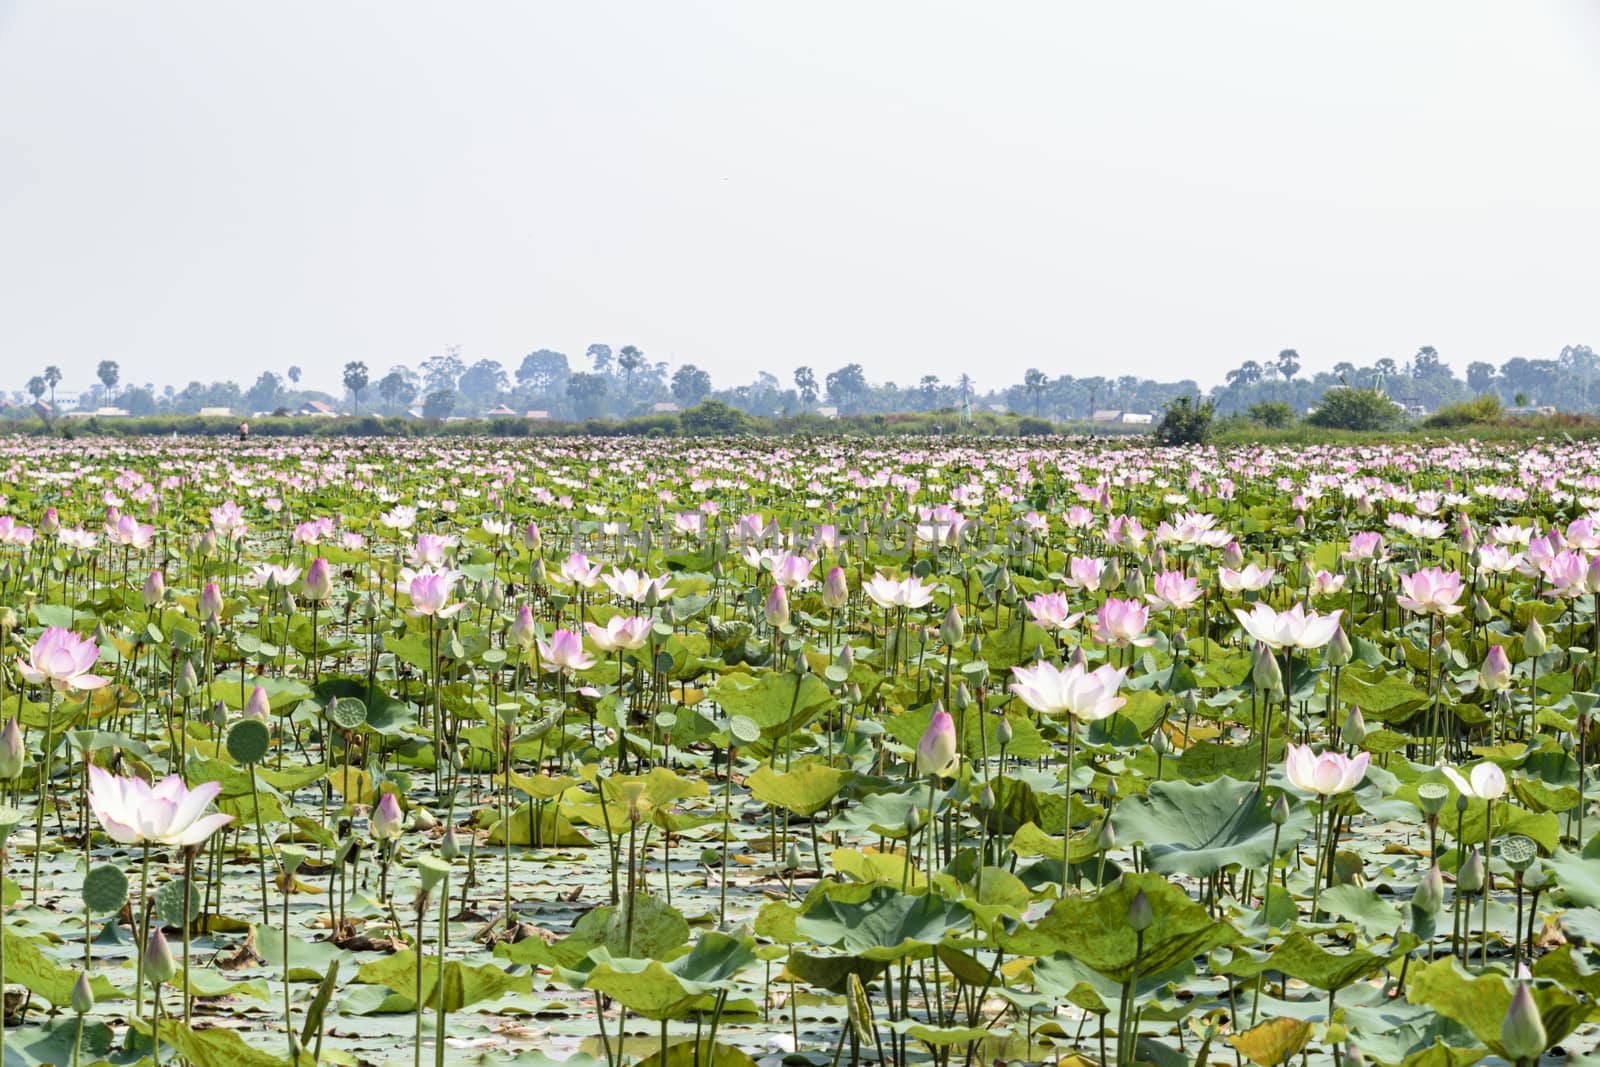 Cambodia, Tonle Sap - March 2016: Lotus farm - 'fields' of lotus plants in ponds	